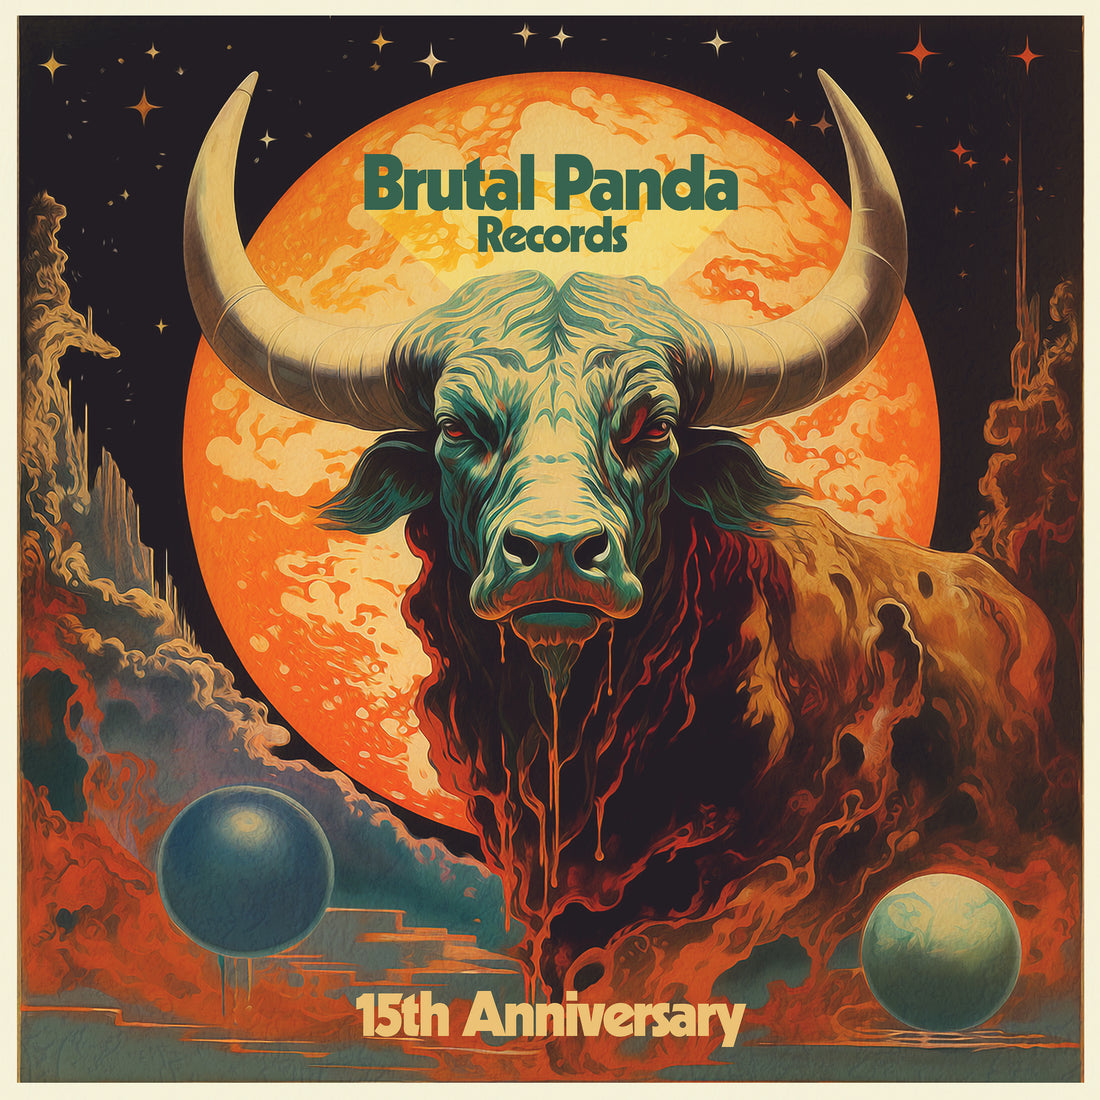 15 Years of Brutal Panda Records: Bandcamp Sampler & Special Anniversary Shows!